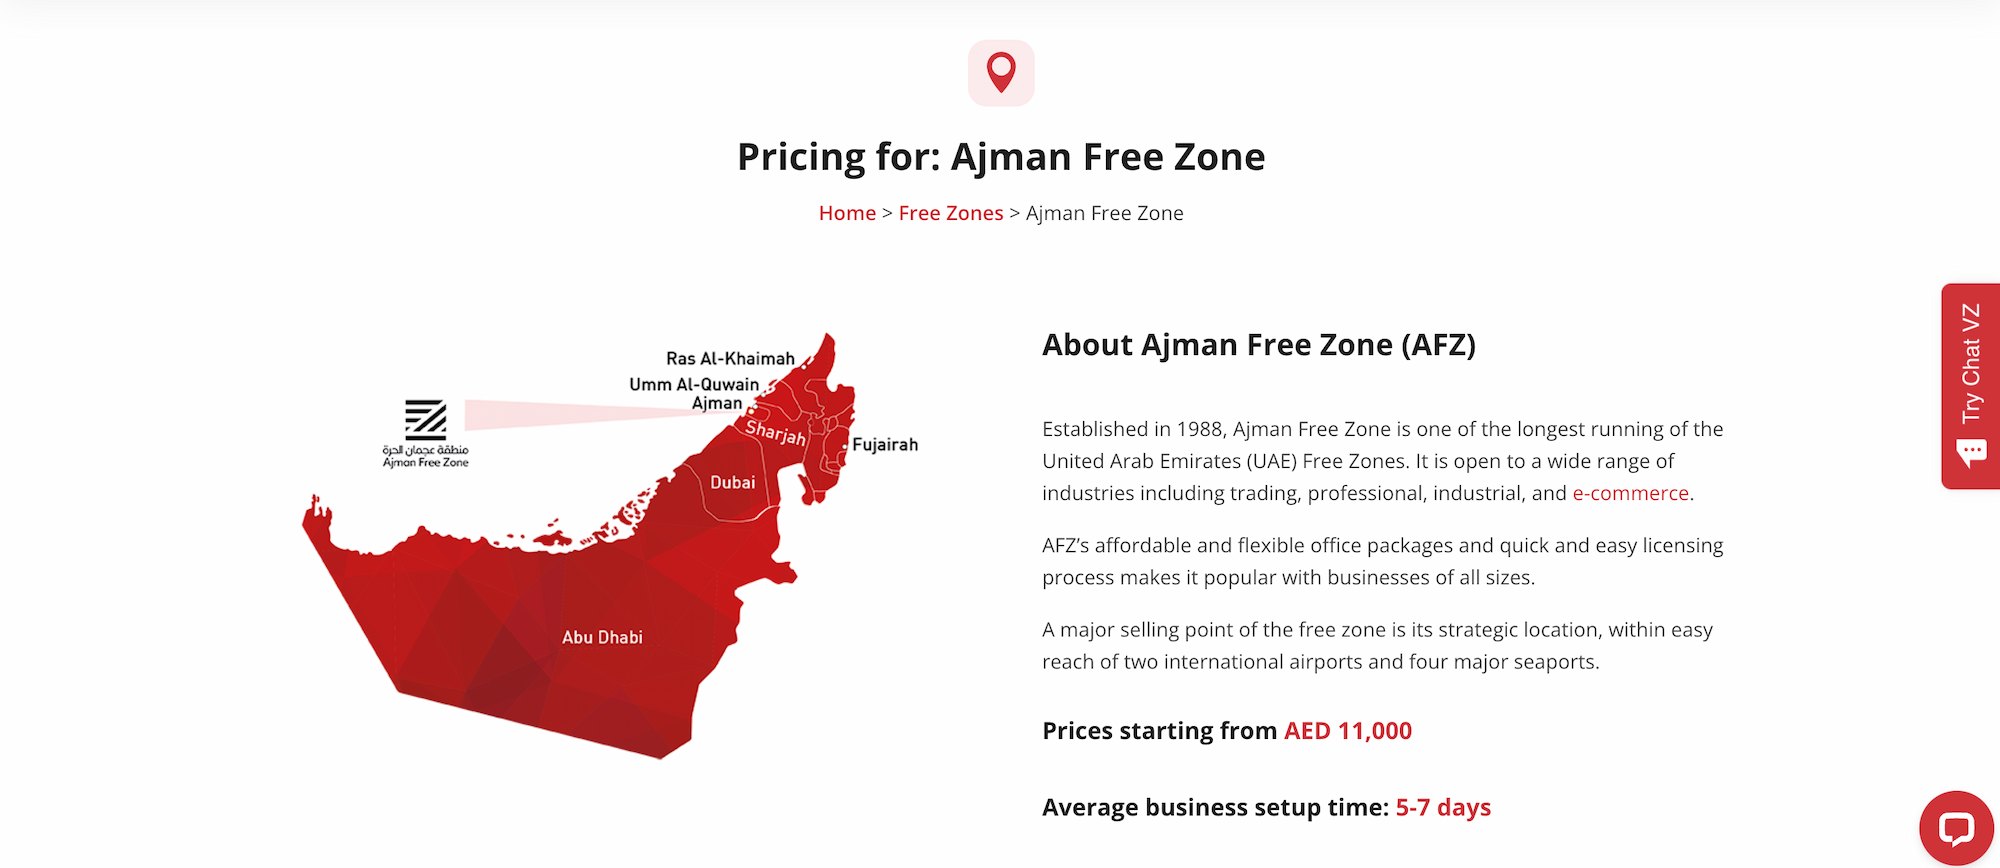 An overview and pricing information of the Ajman Free Zone.